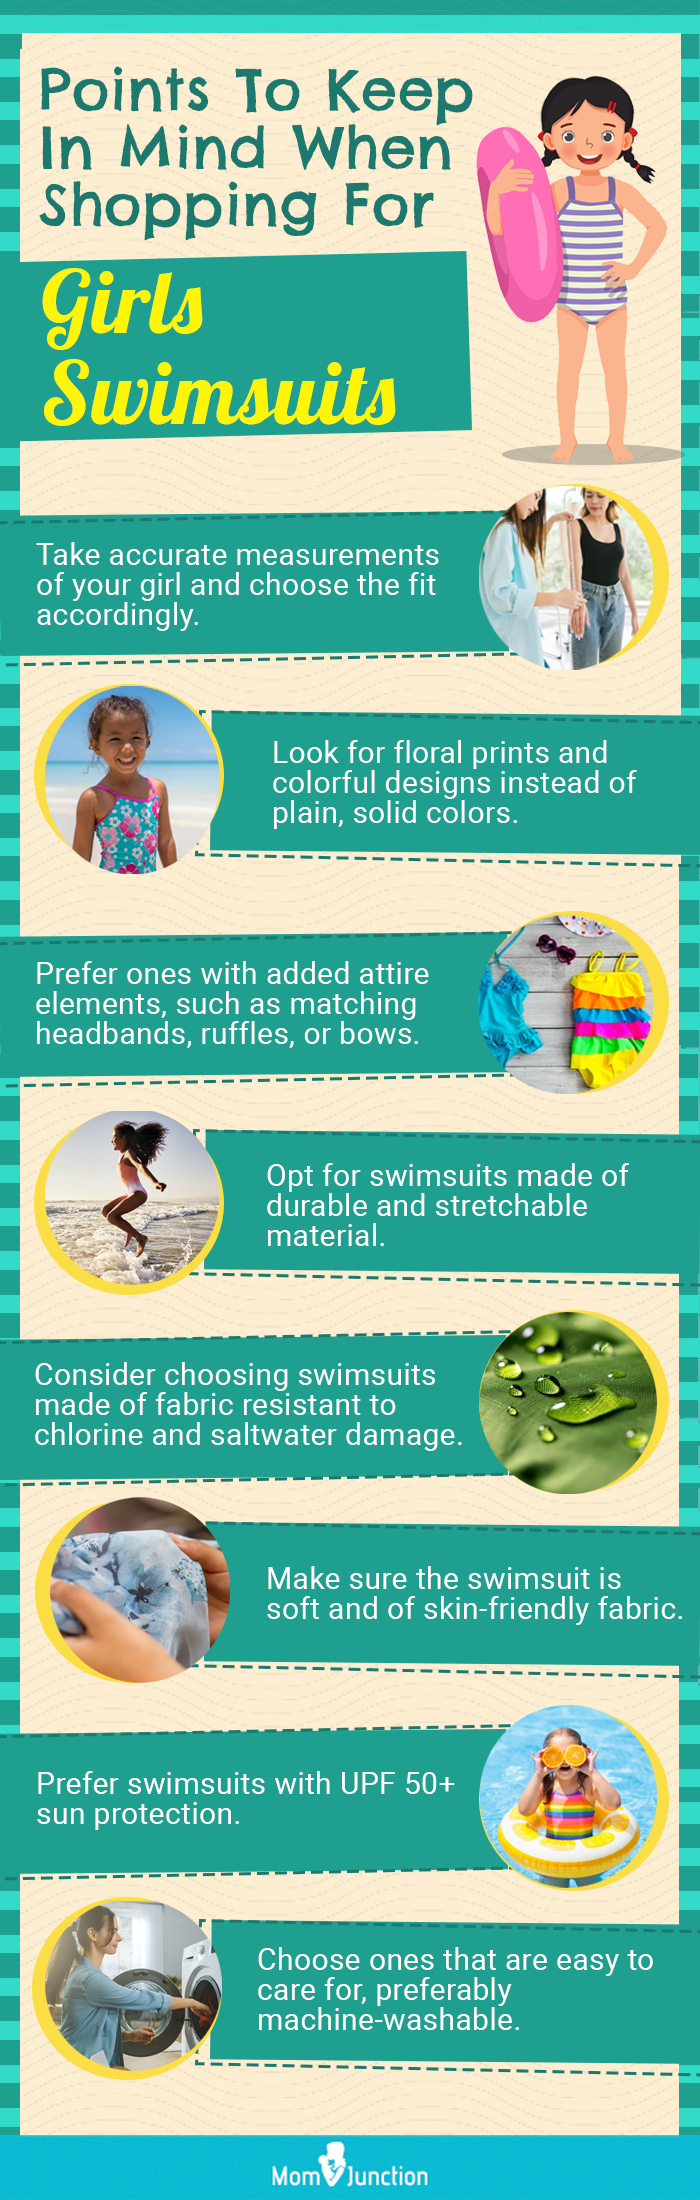 Notable Points To Keep In Mind When Shopping For Girls Swimsuits (infographic)